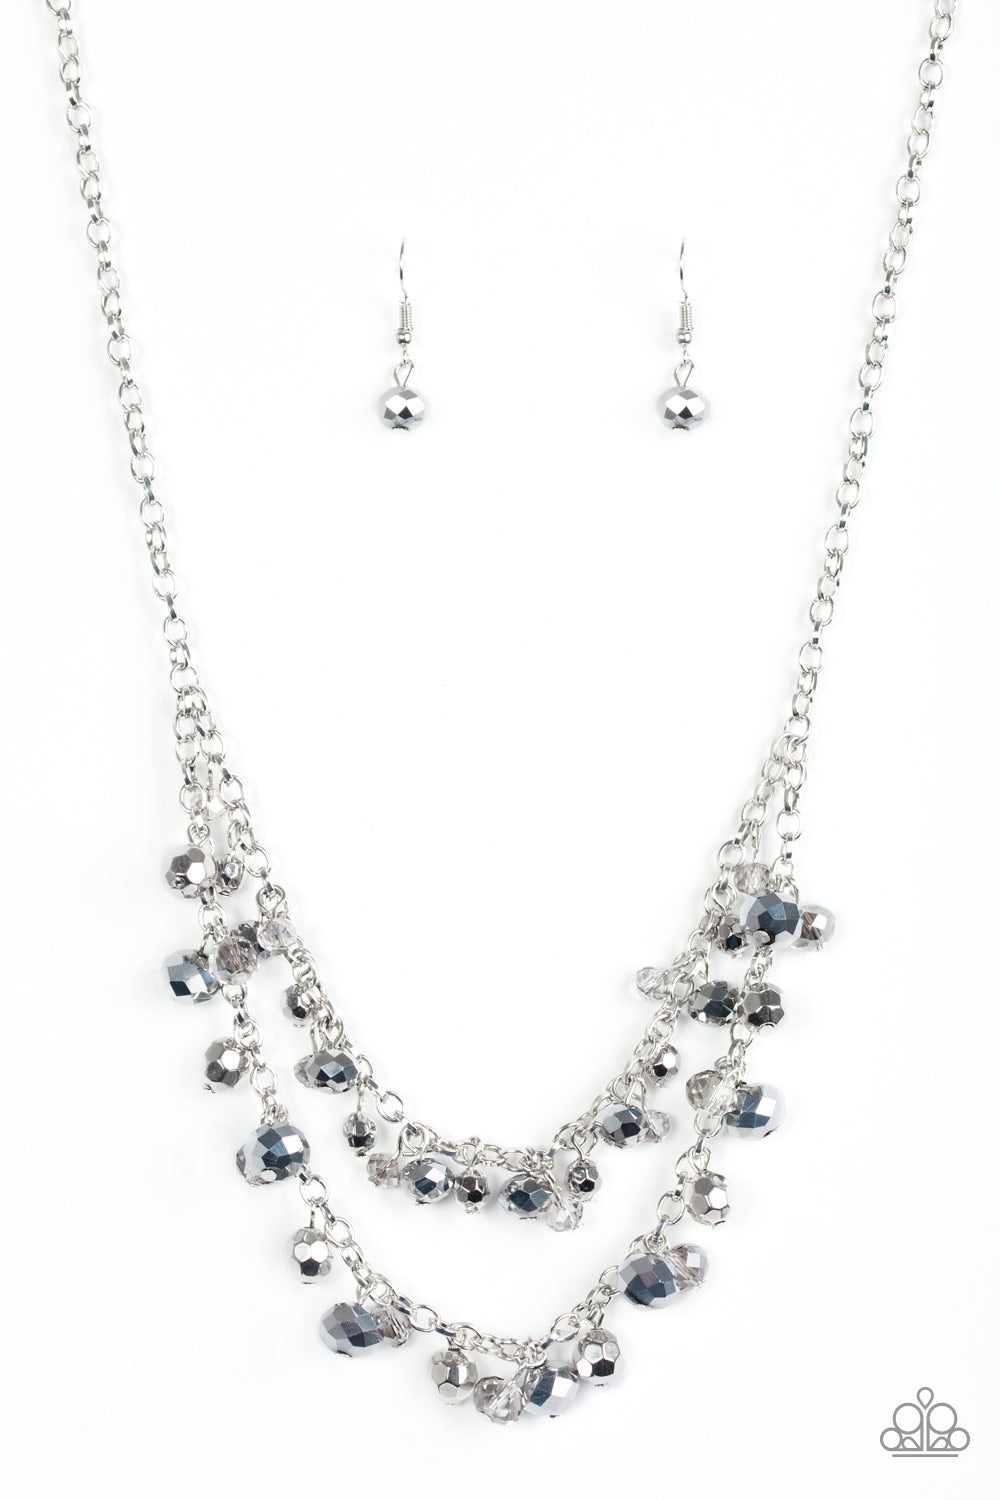 FASHION SHOW FABULOUS - SILVER MIRRORED FACETED BEADS NECKLACE